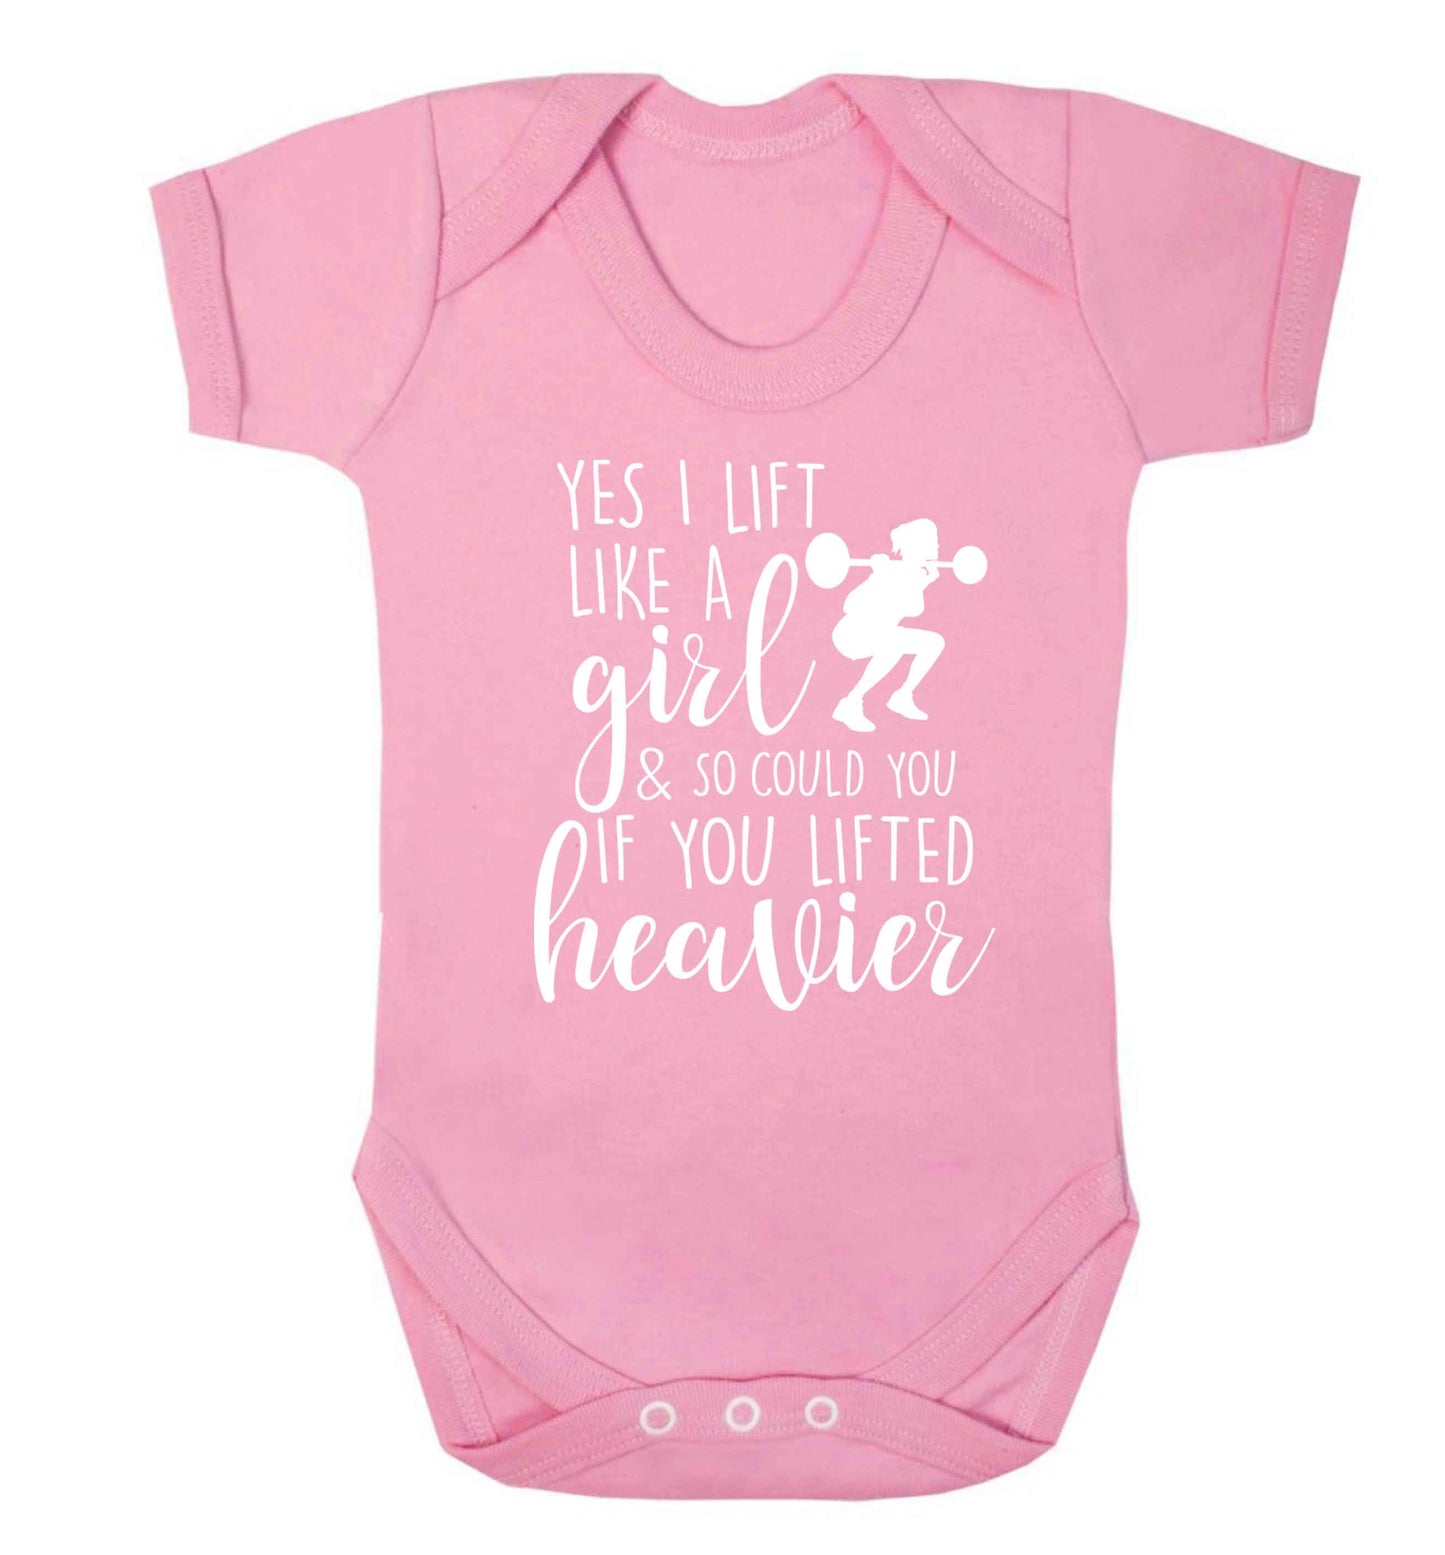 Yes I lift like a girl and so could you if you lifted heavier Baby Vest pale pink 18-24 months